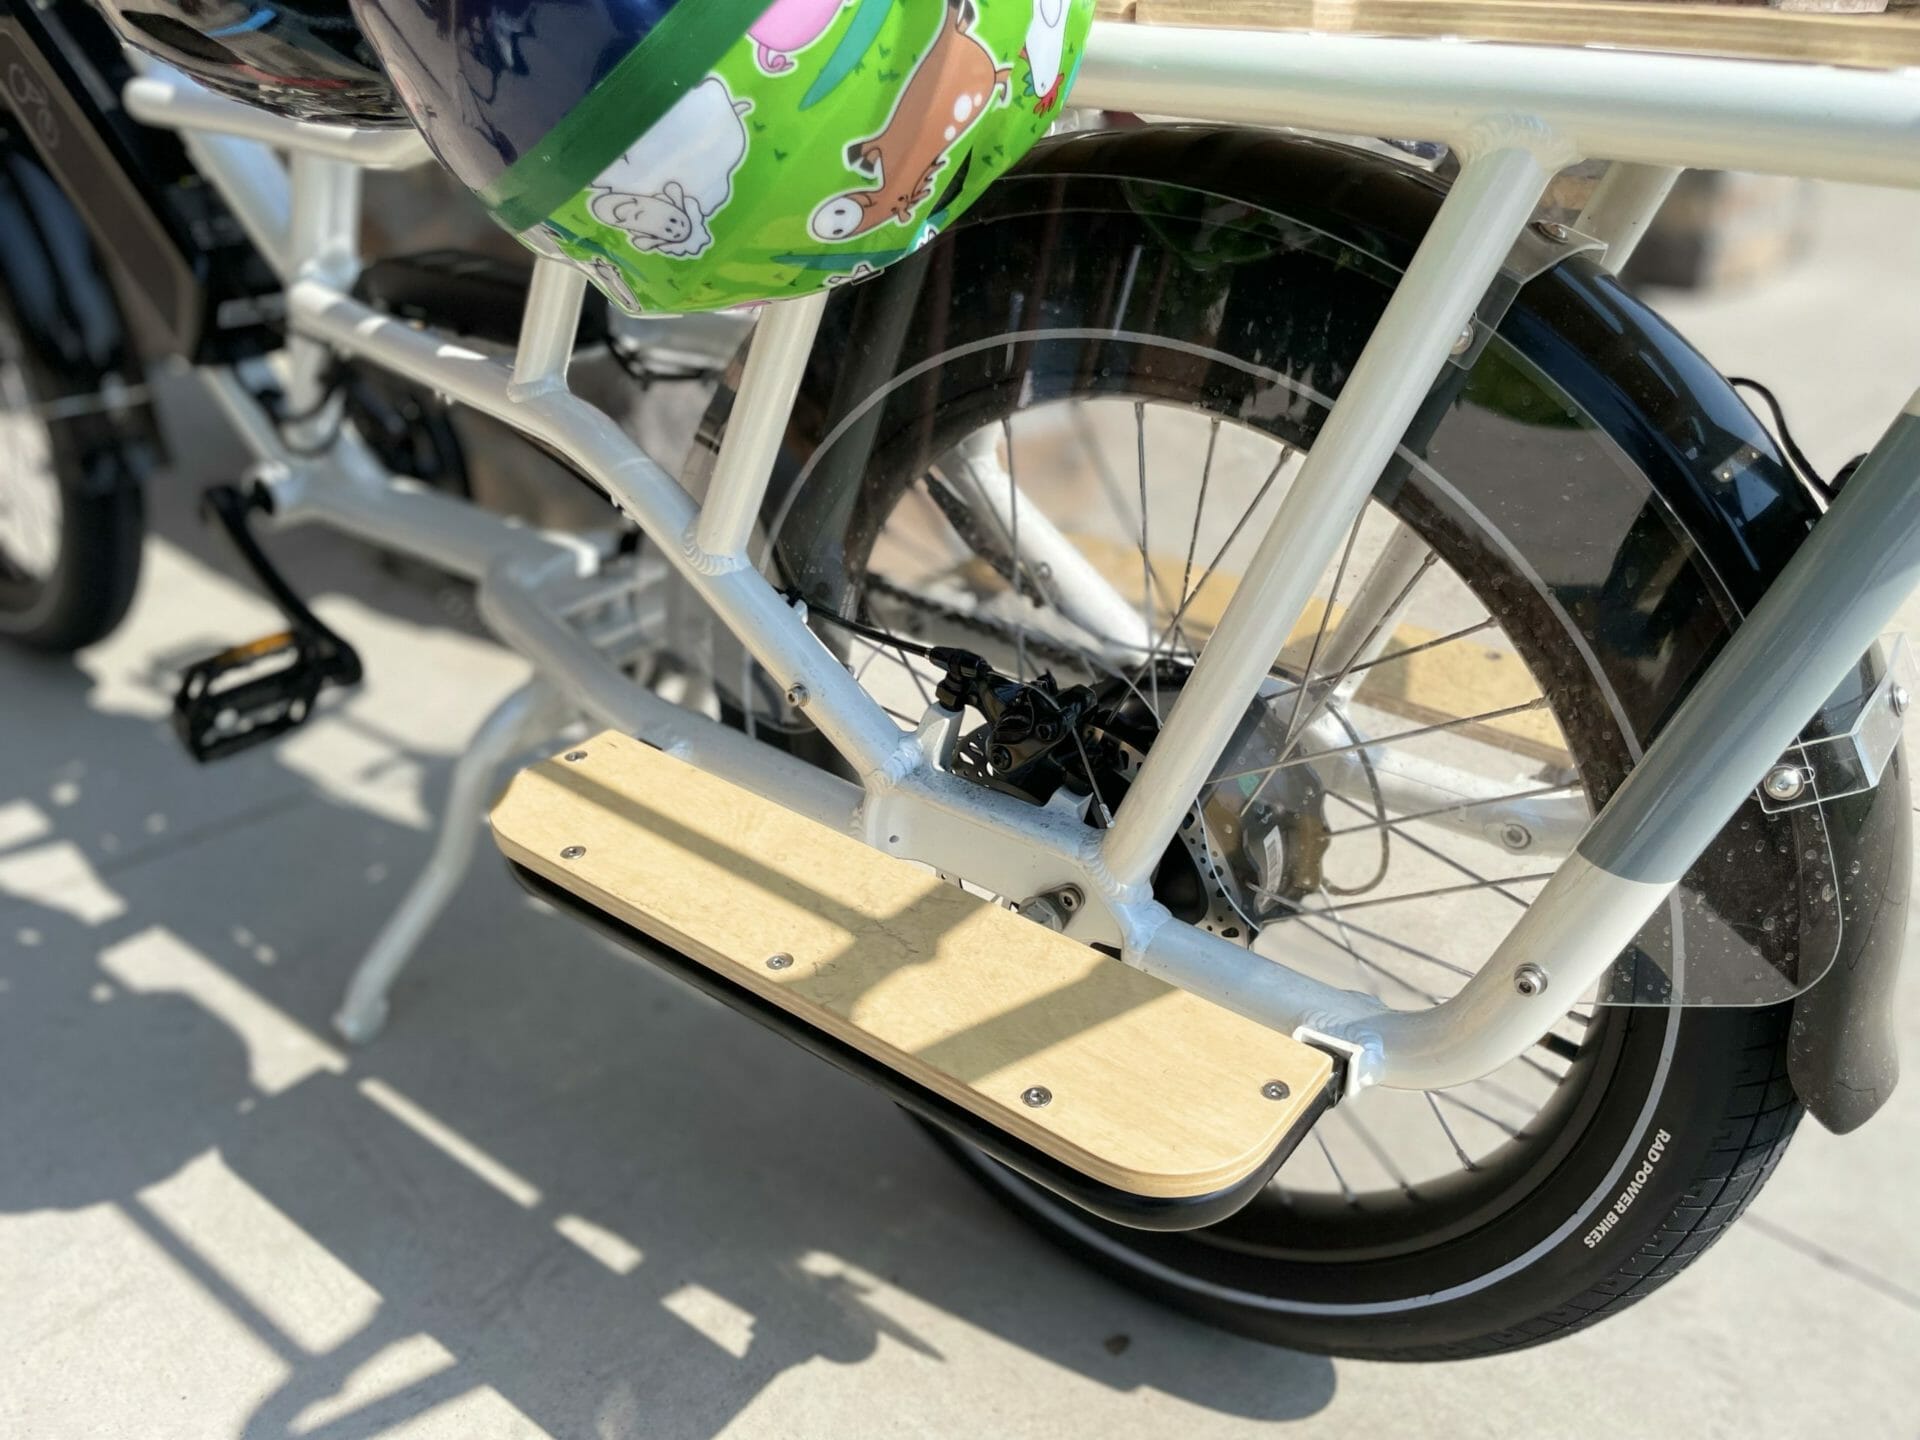 RadWagon 4 Review: The Ultimate Minivan of Electric Bikes (in the best way possible) 13